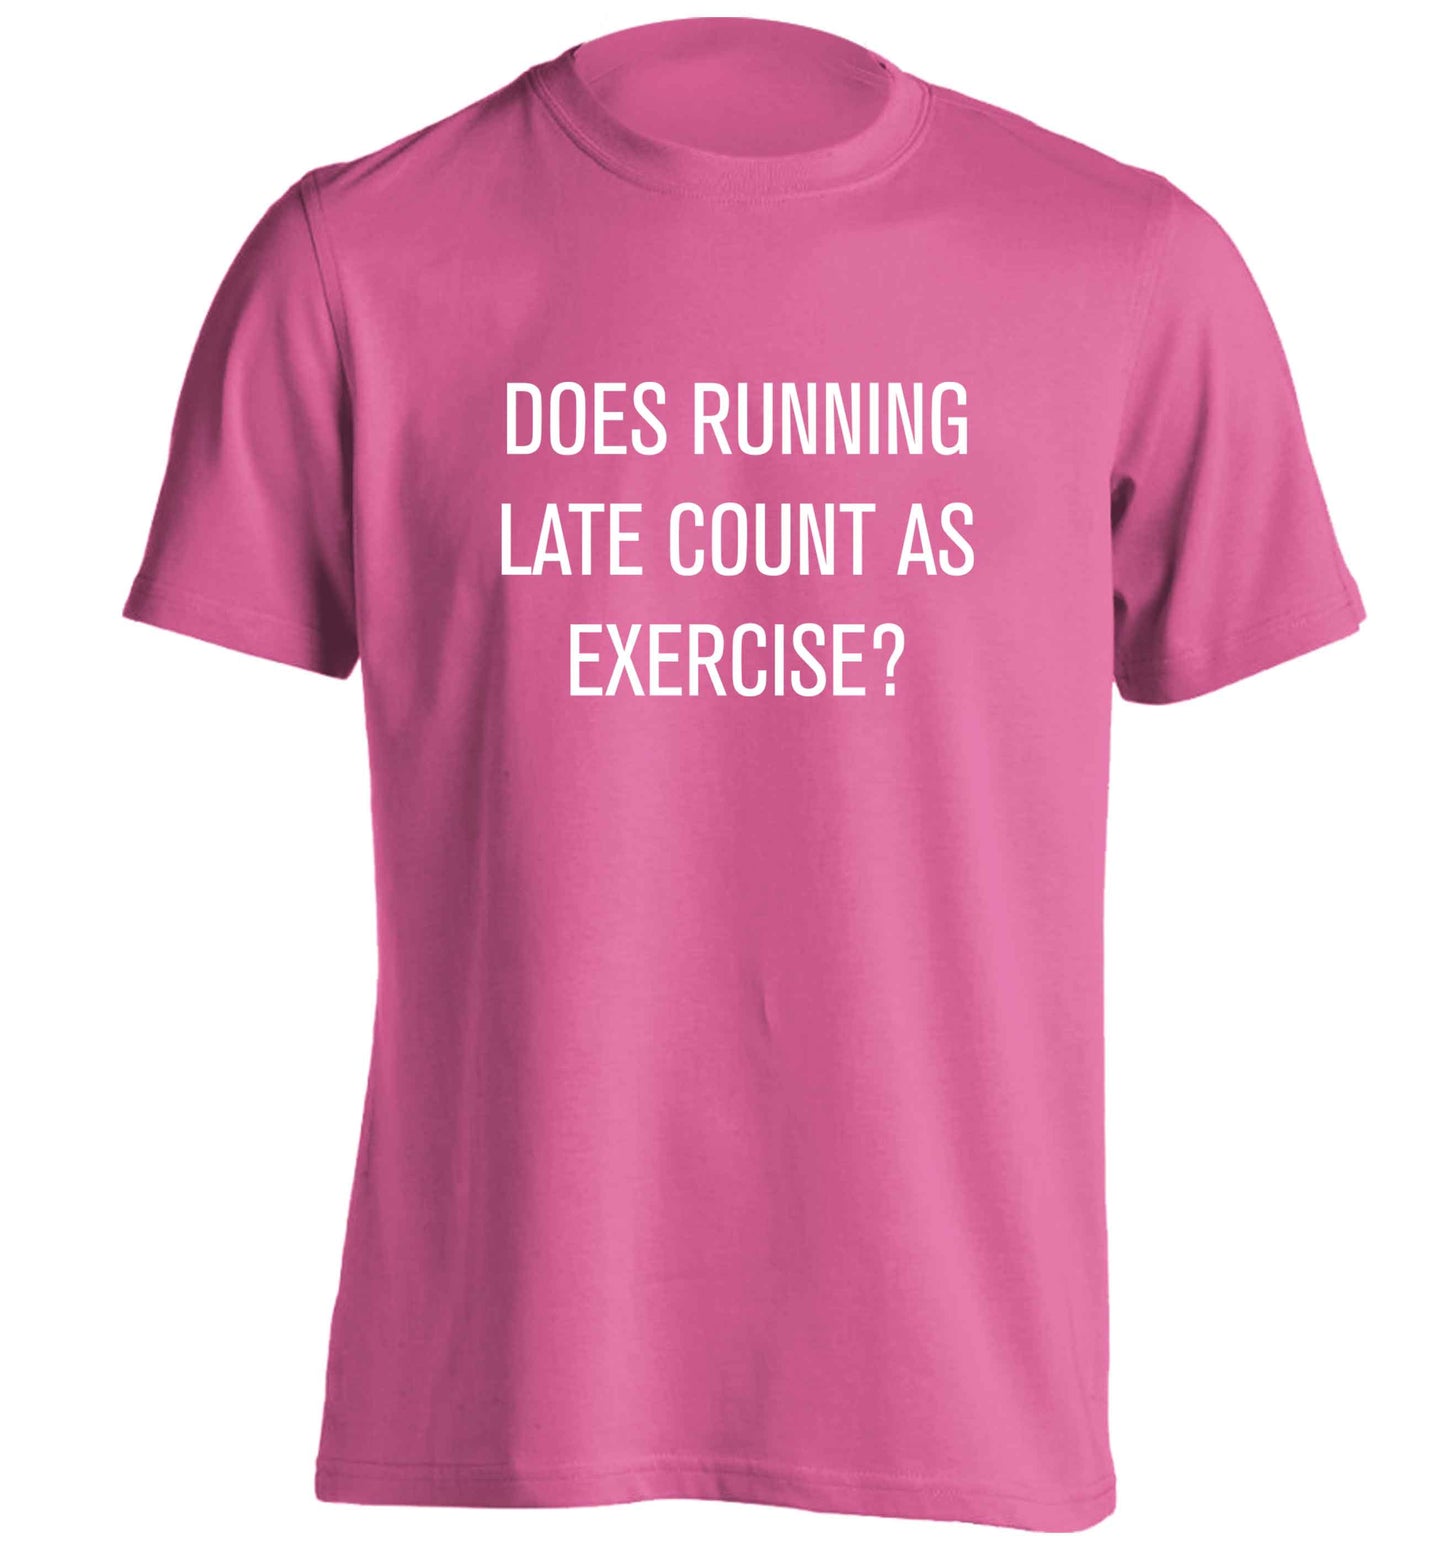 Does running late count as exercise? adults unisex pink Tshirt 2XL